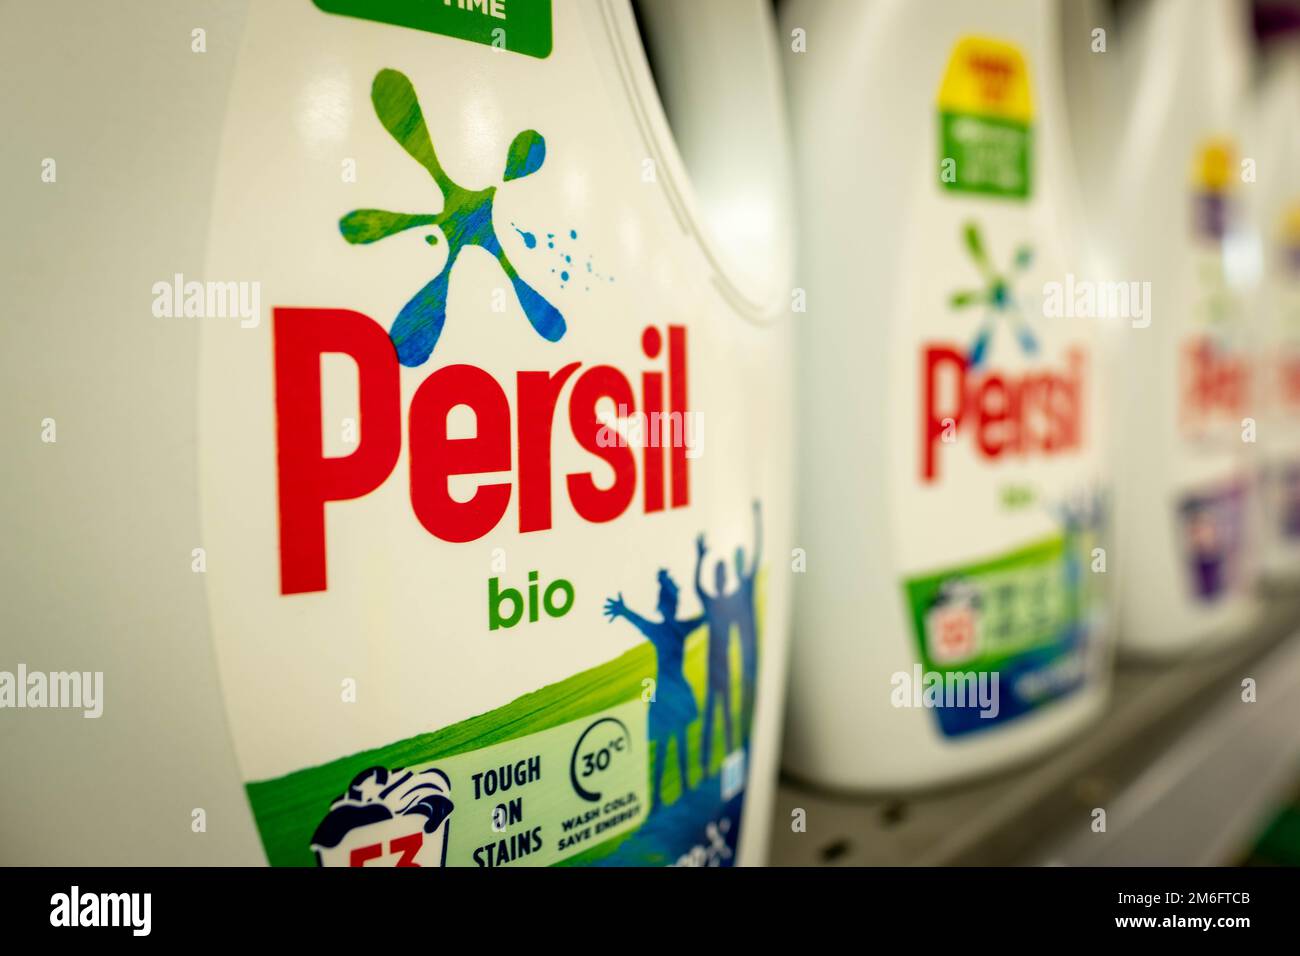 Surrey UK- December 2022: Persil products on British supermarket shelf- German brand of laundry detergent manufactured by Ulilever and Henkel Stock Photo